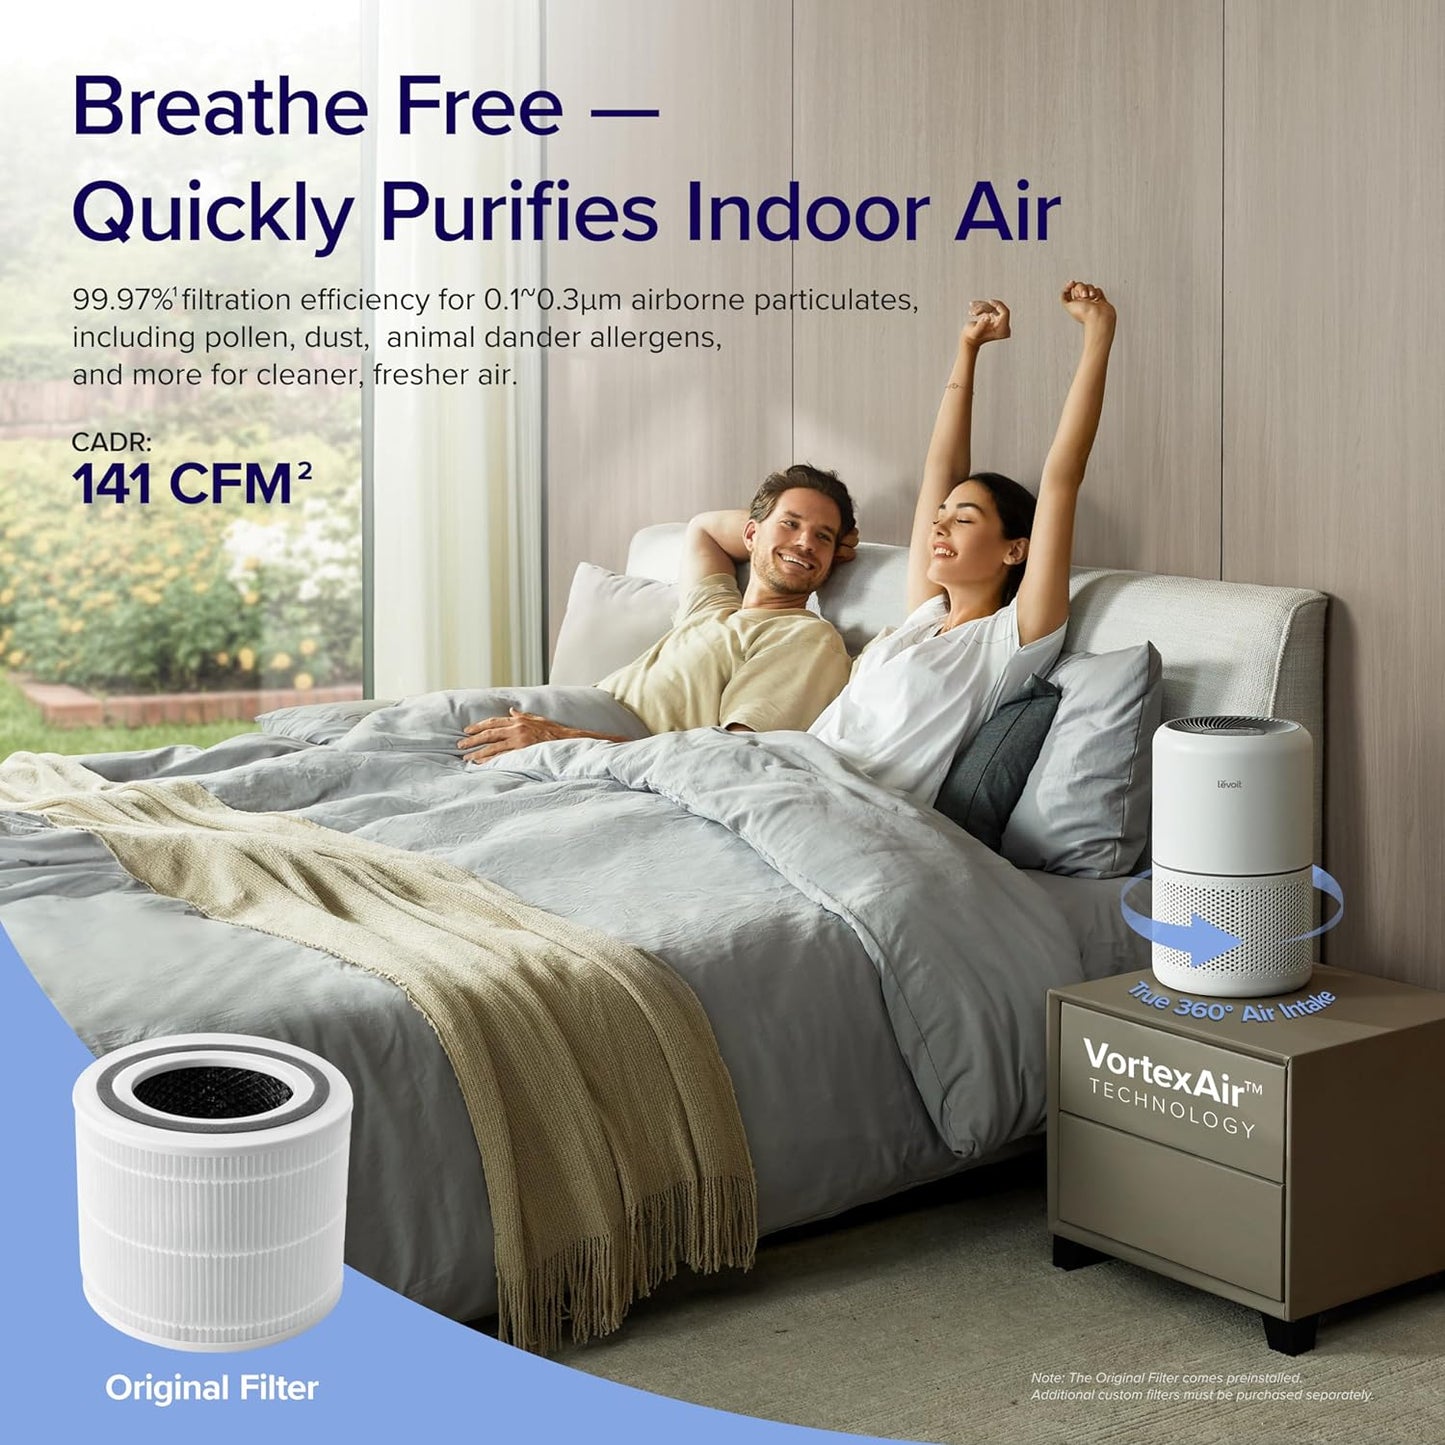 LEVOIT Air Purifier for Home Allergies Pets Hair in Bedroom, Covers Up to 1095 Sq.Foot Powered by 45W High Torque Motor, 3-in-1 Filter, Remove Dust Smoke Pollutants Odor, Core 300 / Core300-P, Black